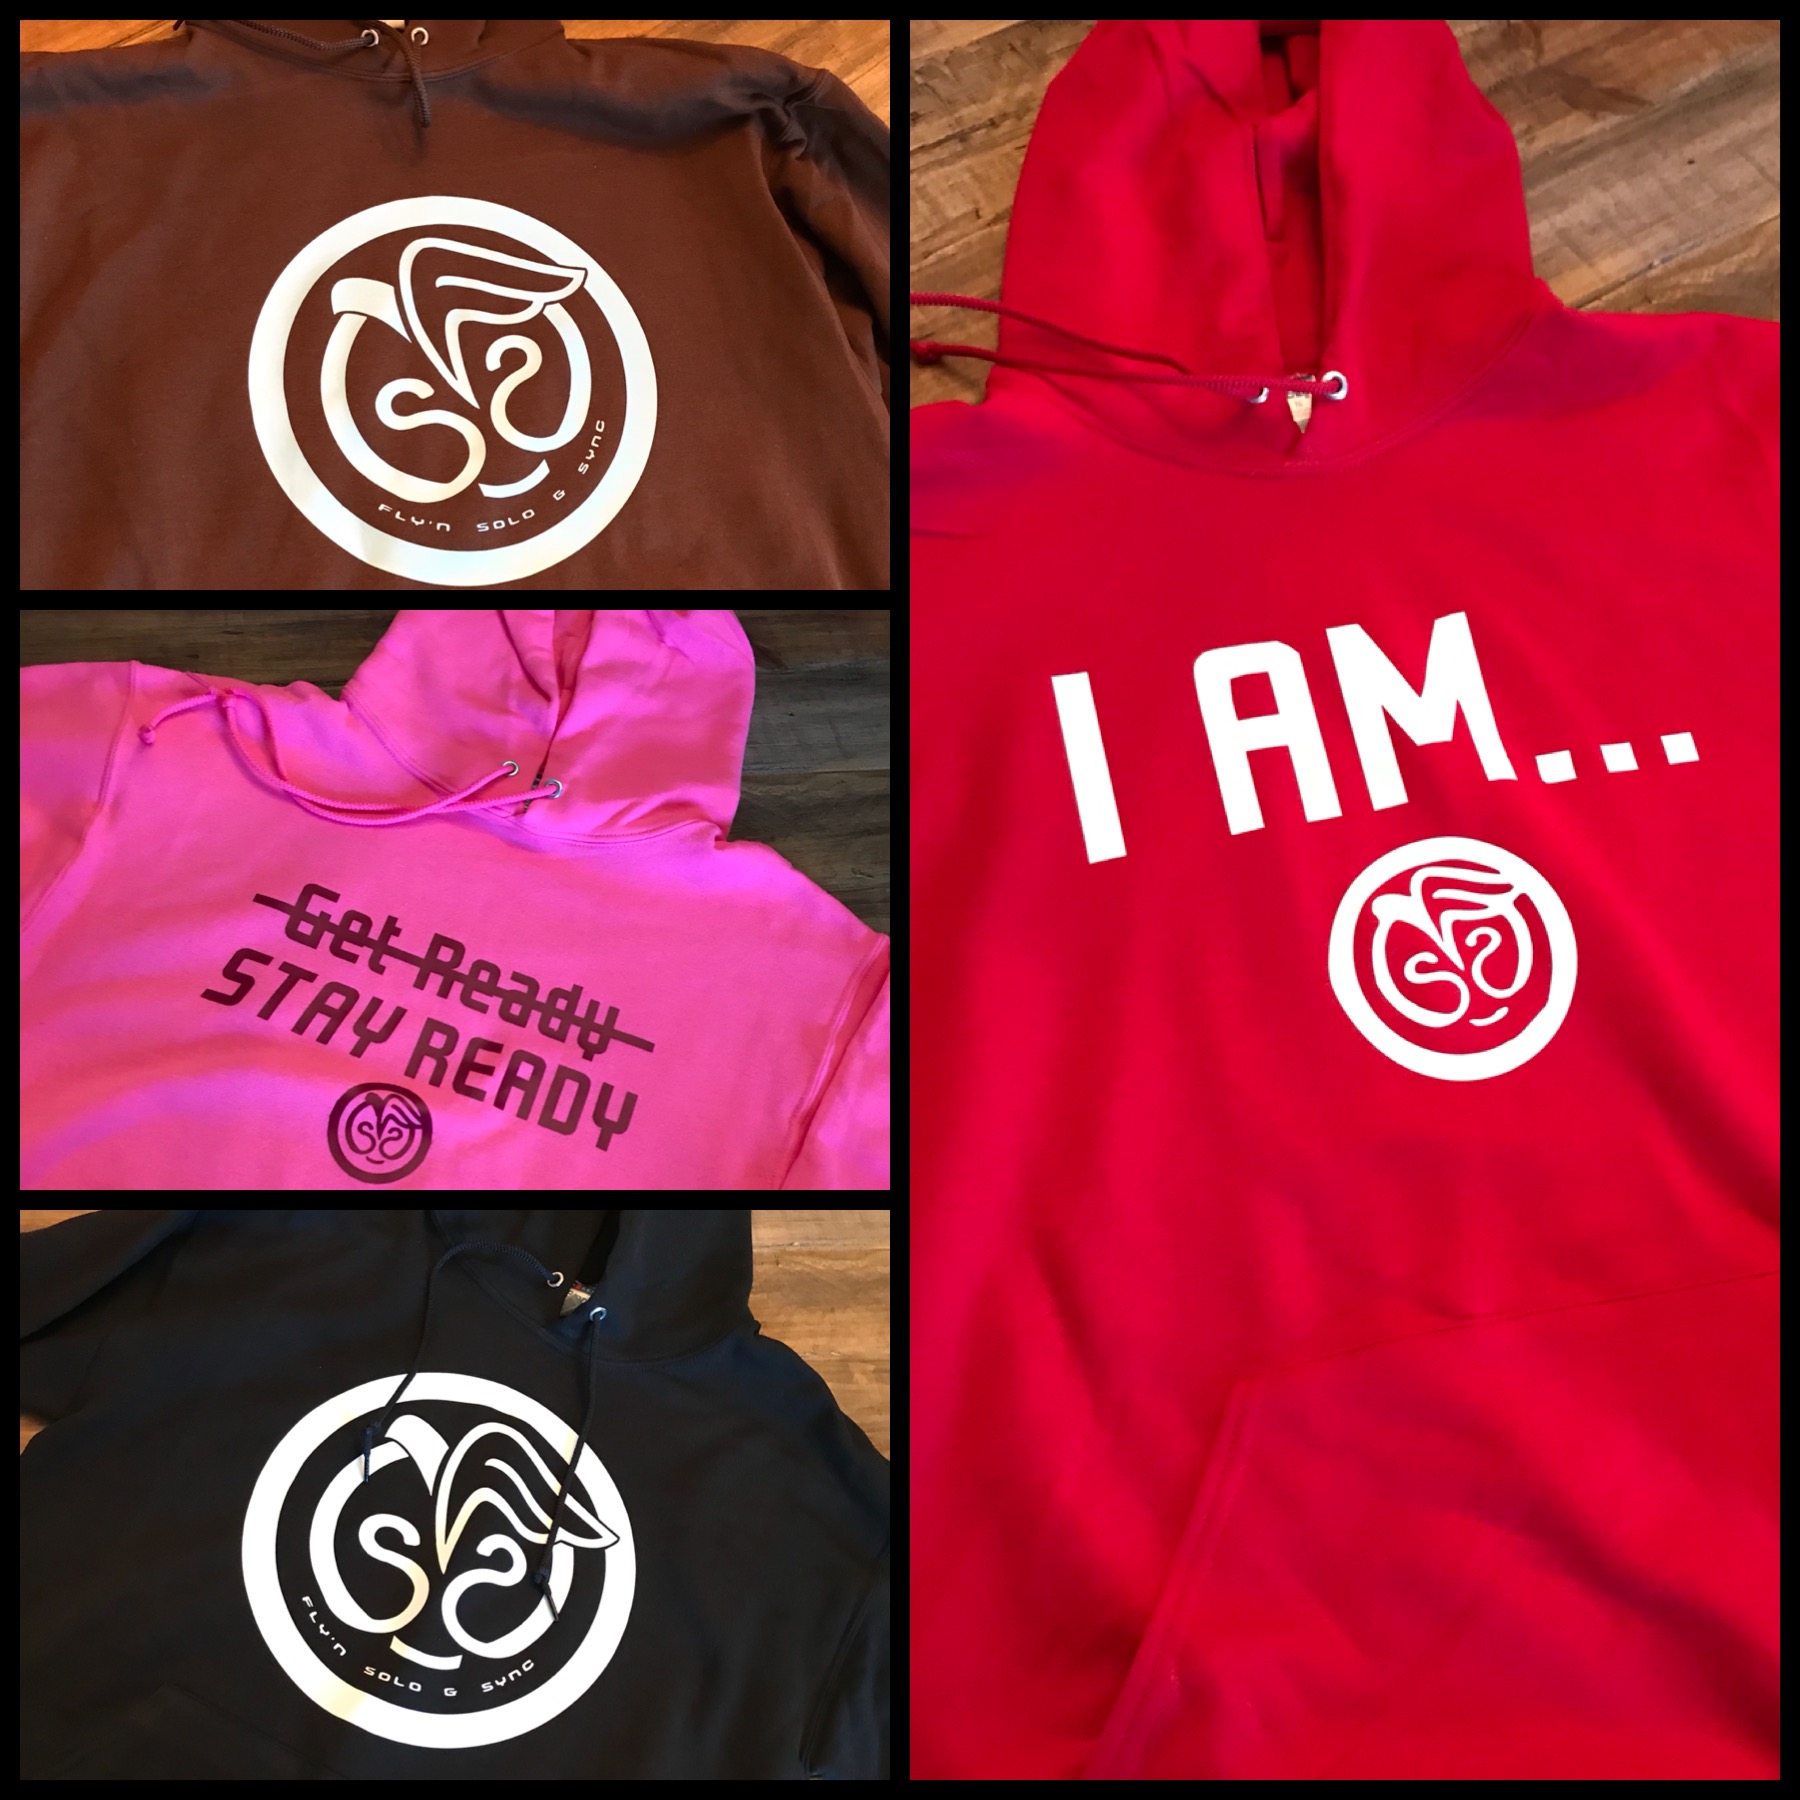 Positive Affirmations Apparel benefiting Victims of Bullying